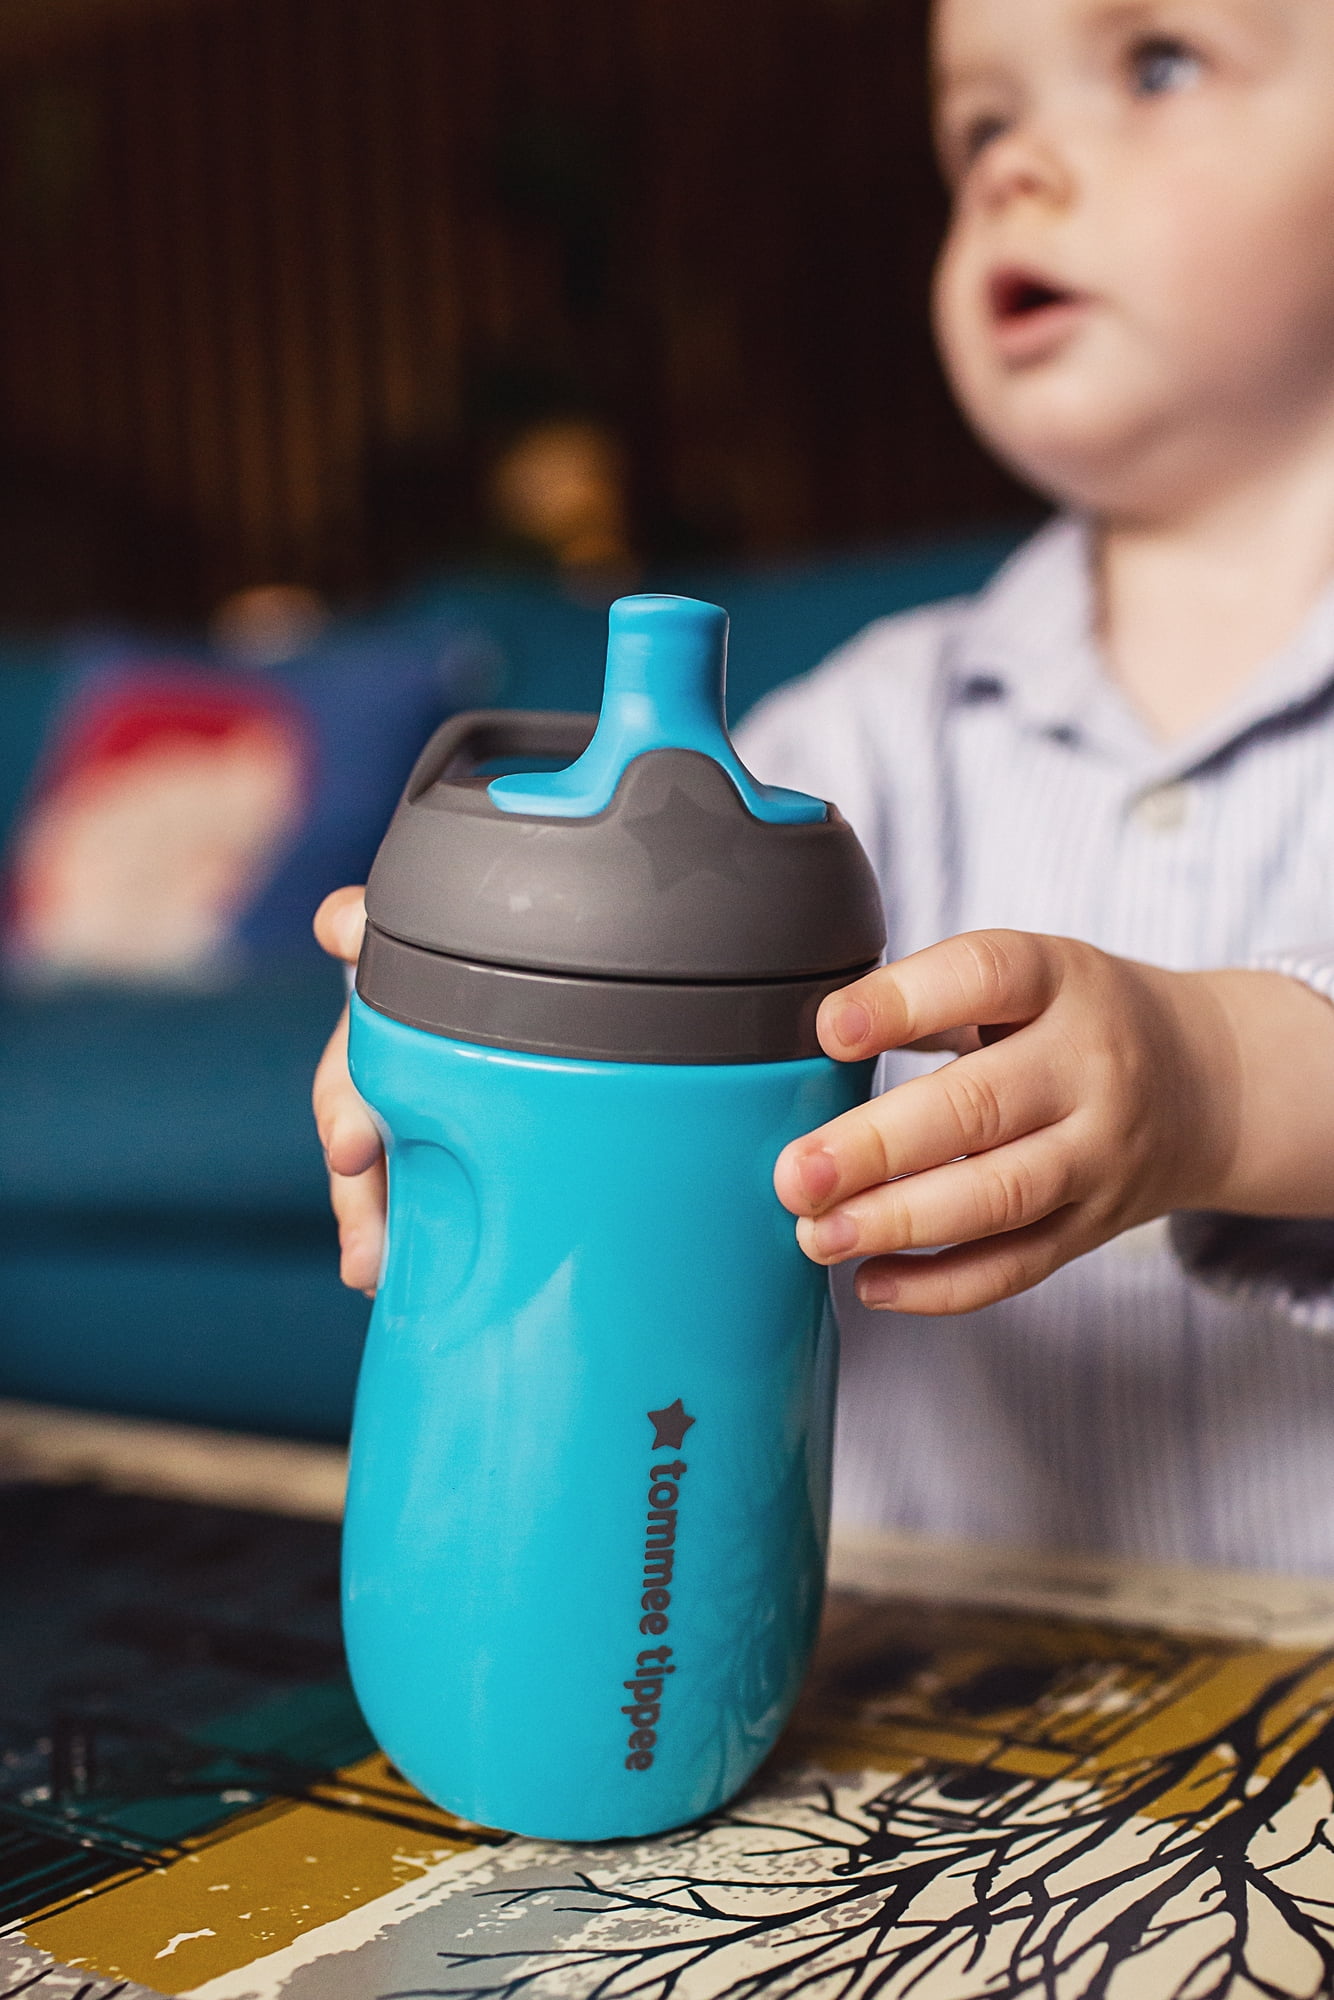 Tommee Tippee Sporty Toddler Sippy Cup